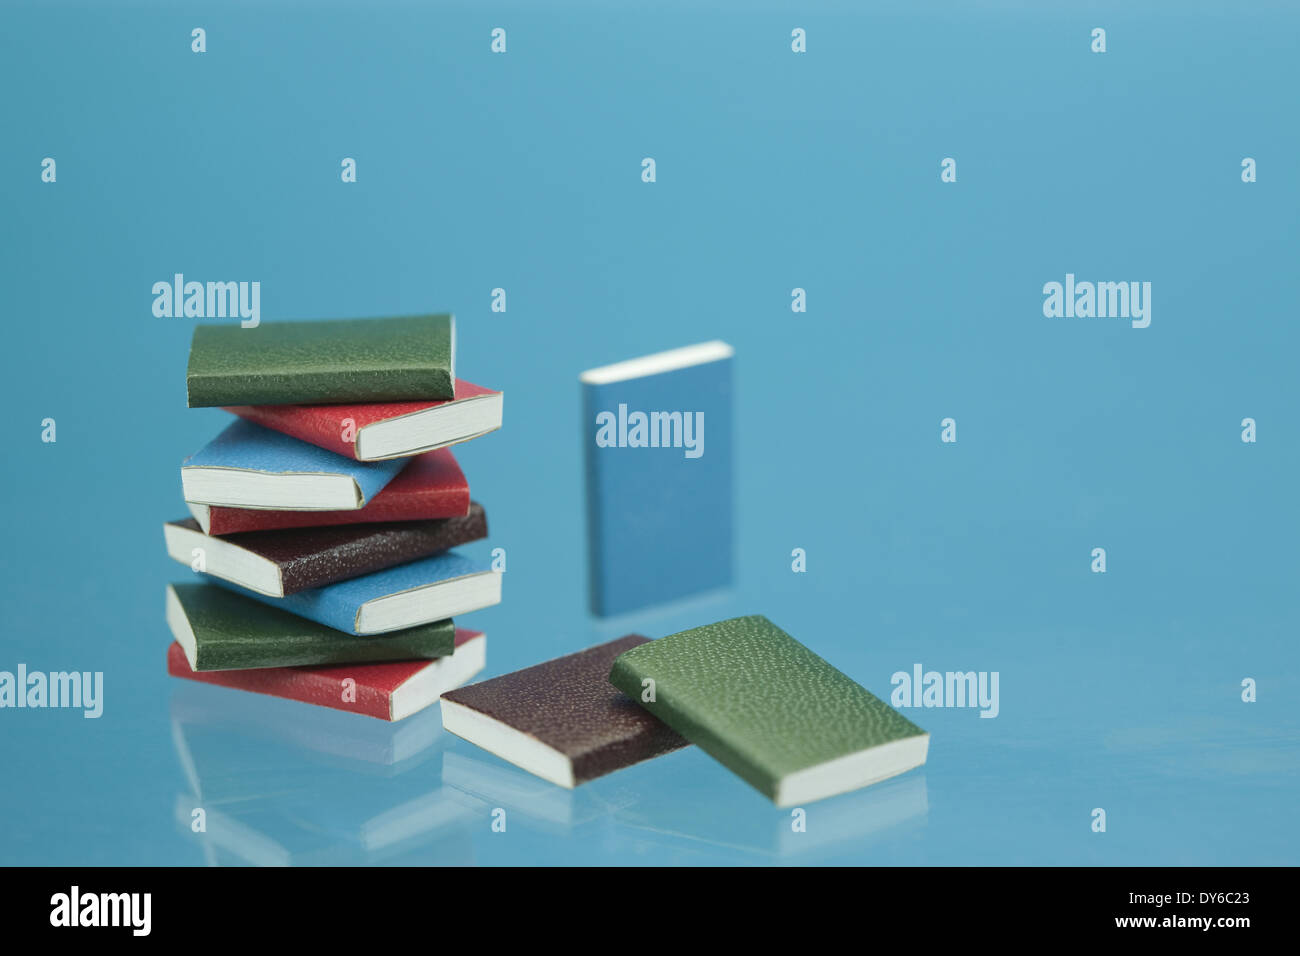 back to school concept with miniature school books Stock Photo